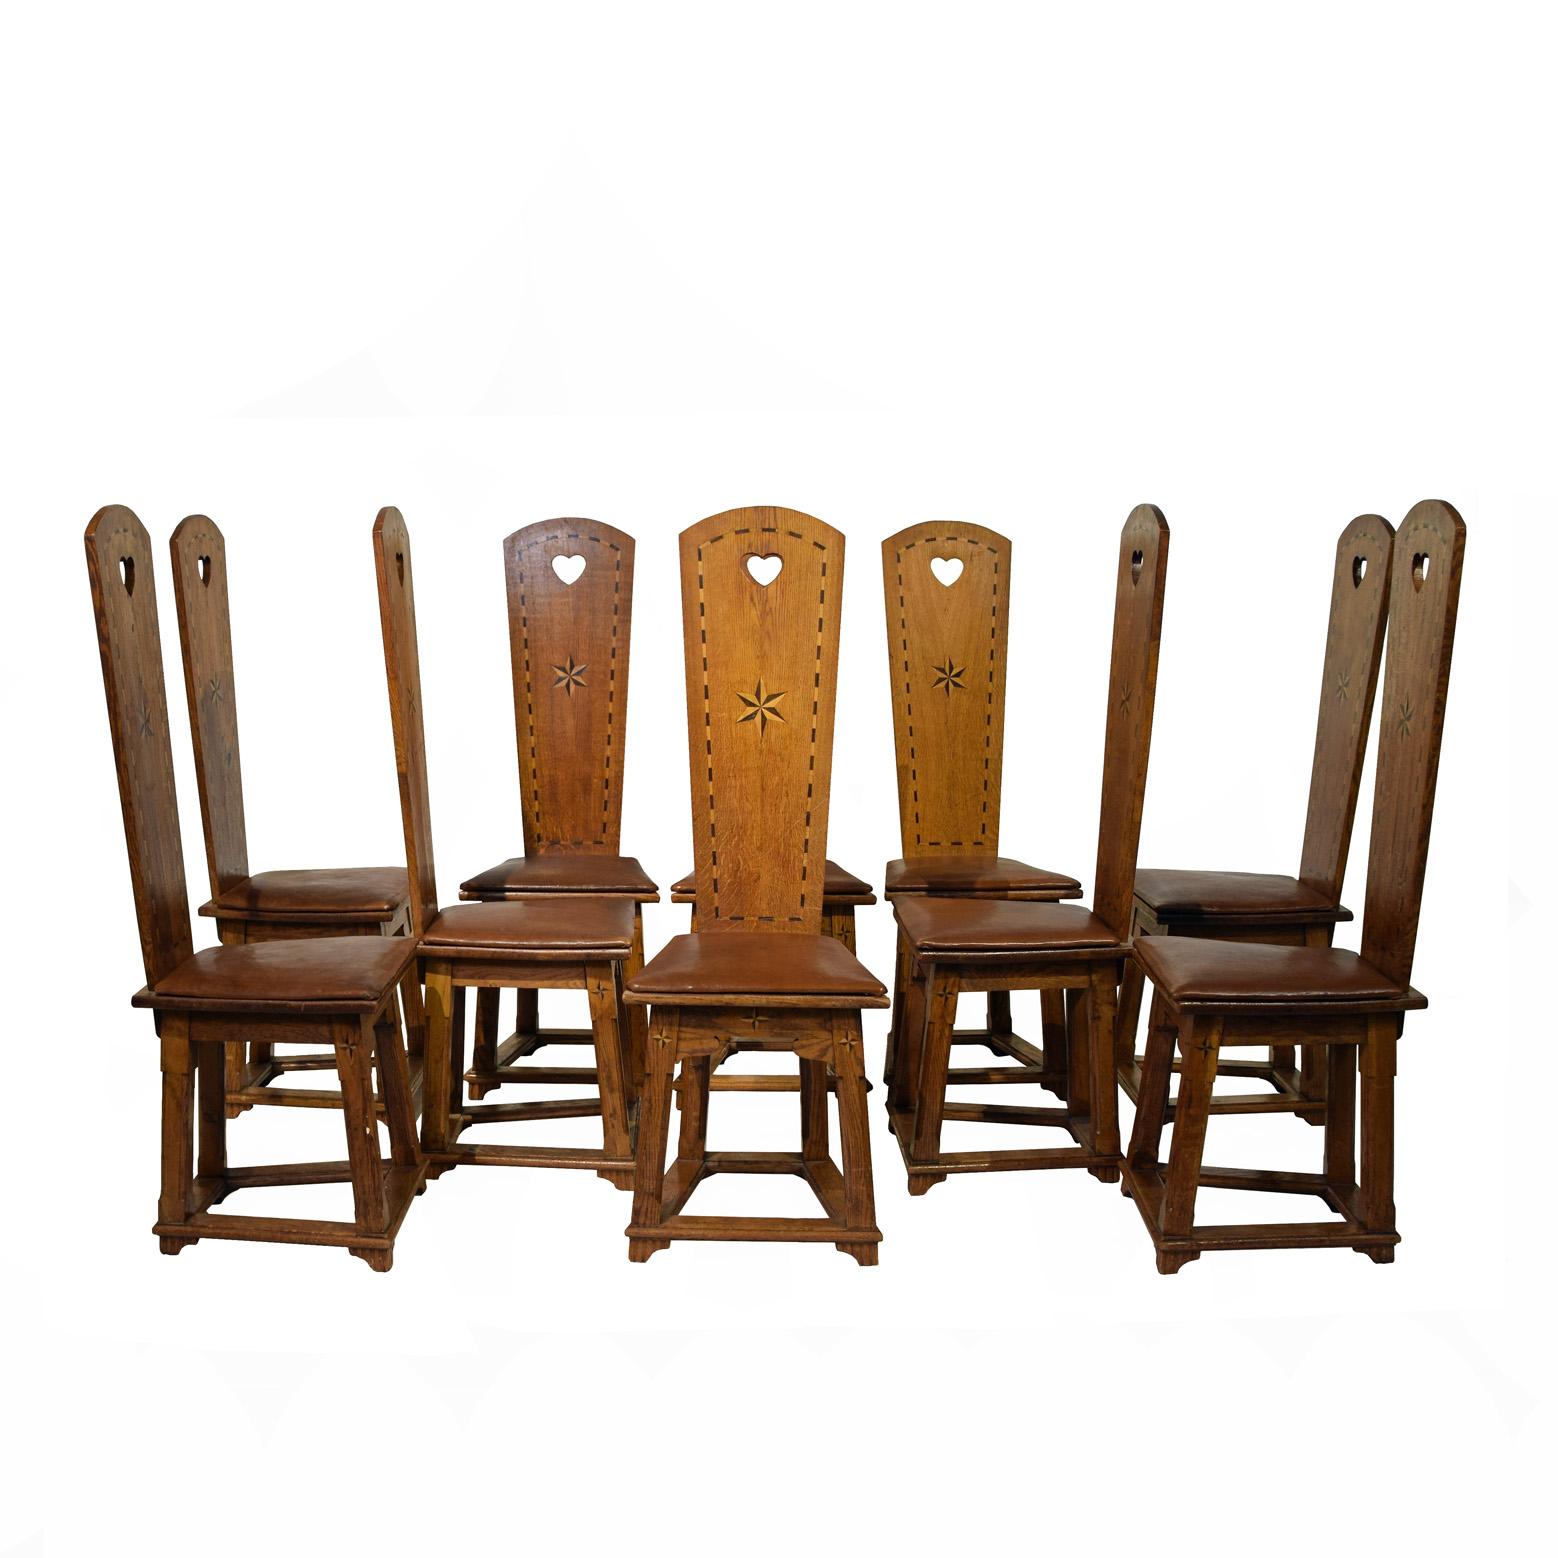 Villa Foresta was build in the years 1908-1910. The architects were Ernst Stenhammar and Edvard Bernhard who also designed the Grand Hotel Royal on Blasieholmen in Stockholm . Ten chairs are made in solid oak with inlay original condition 